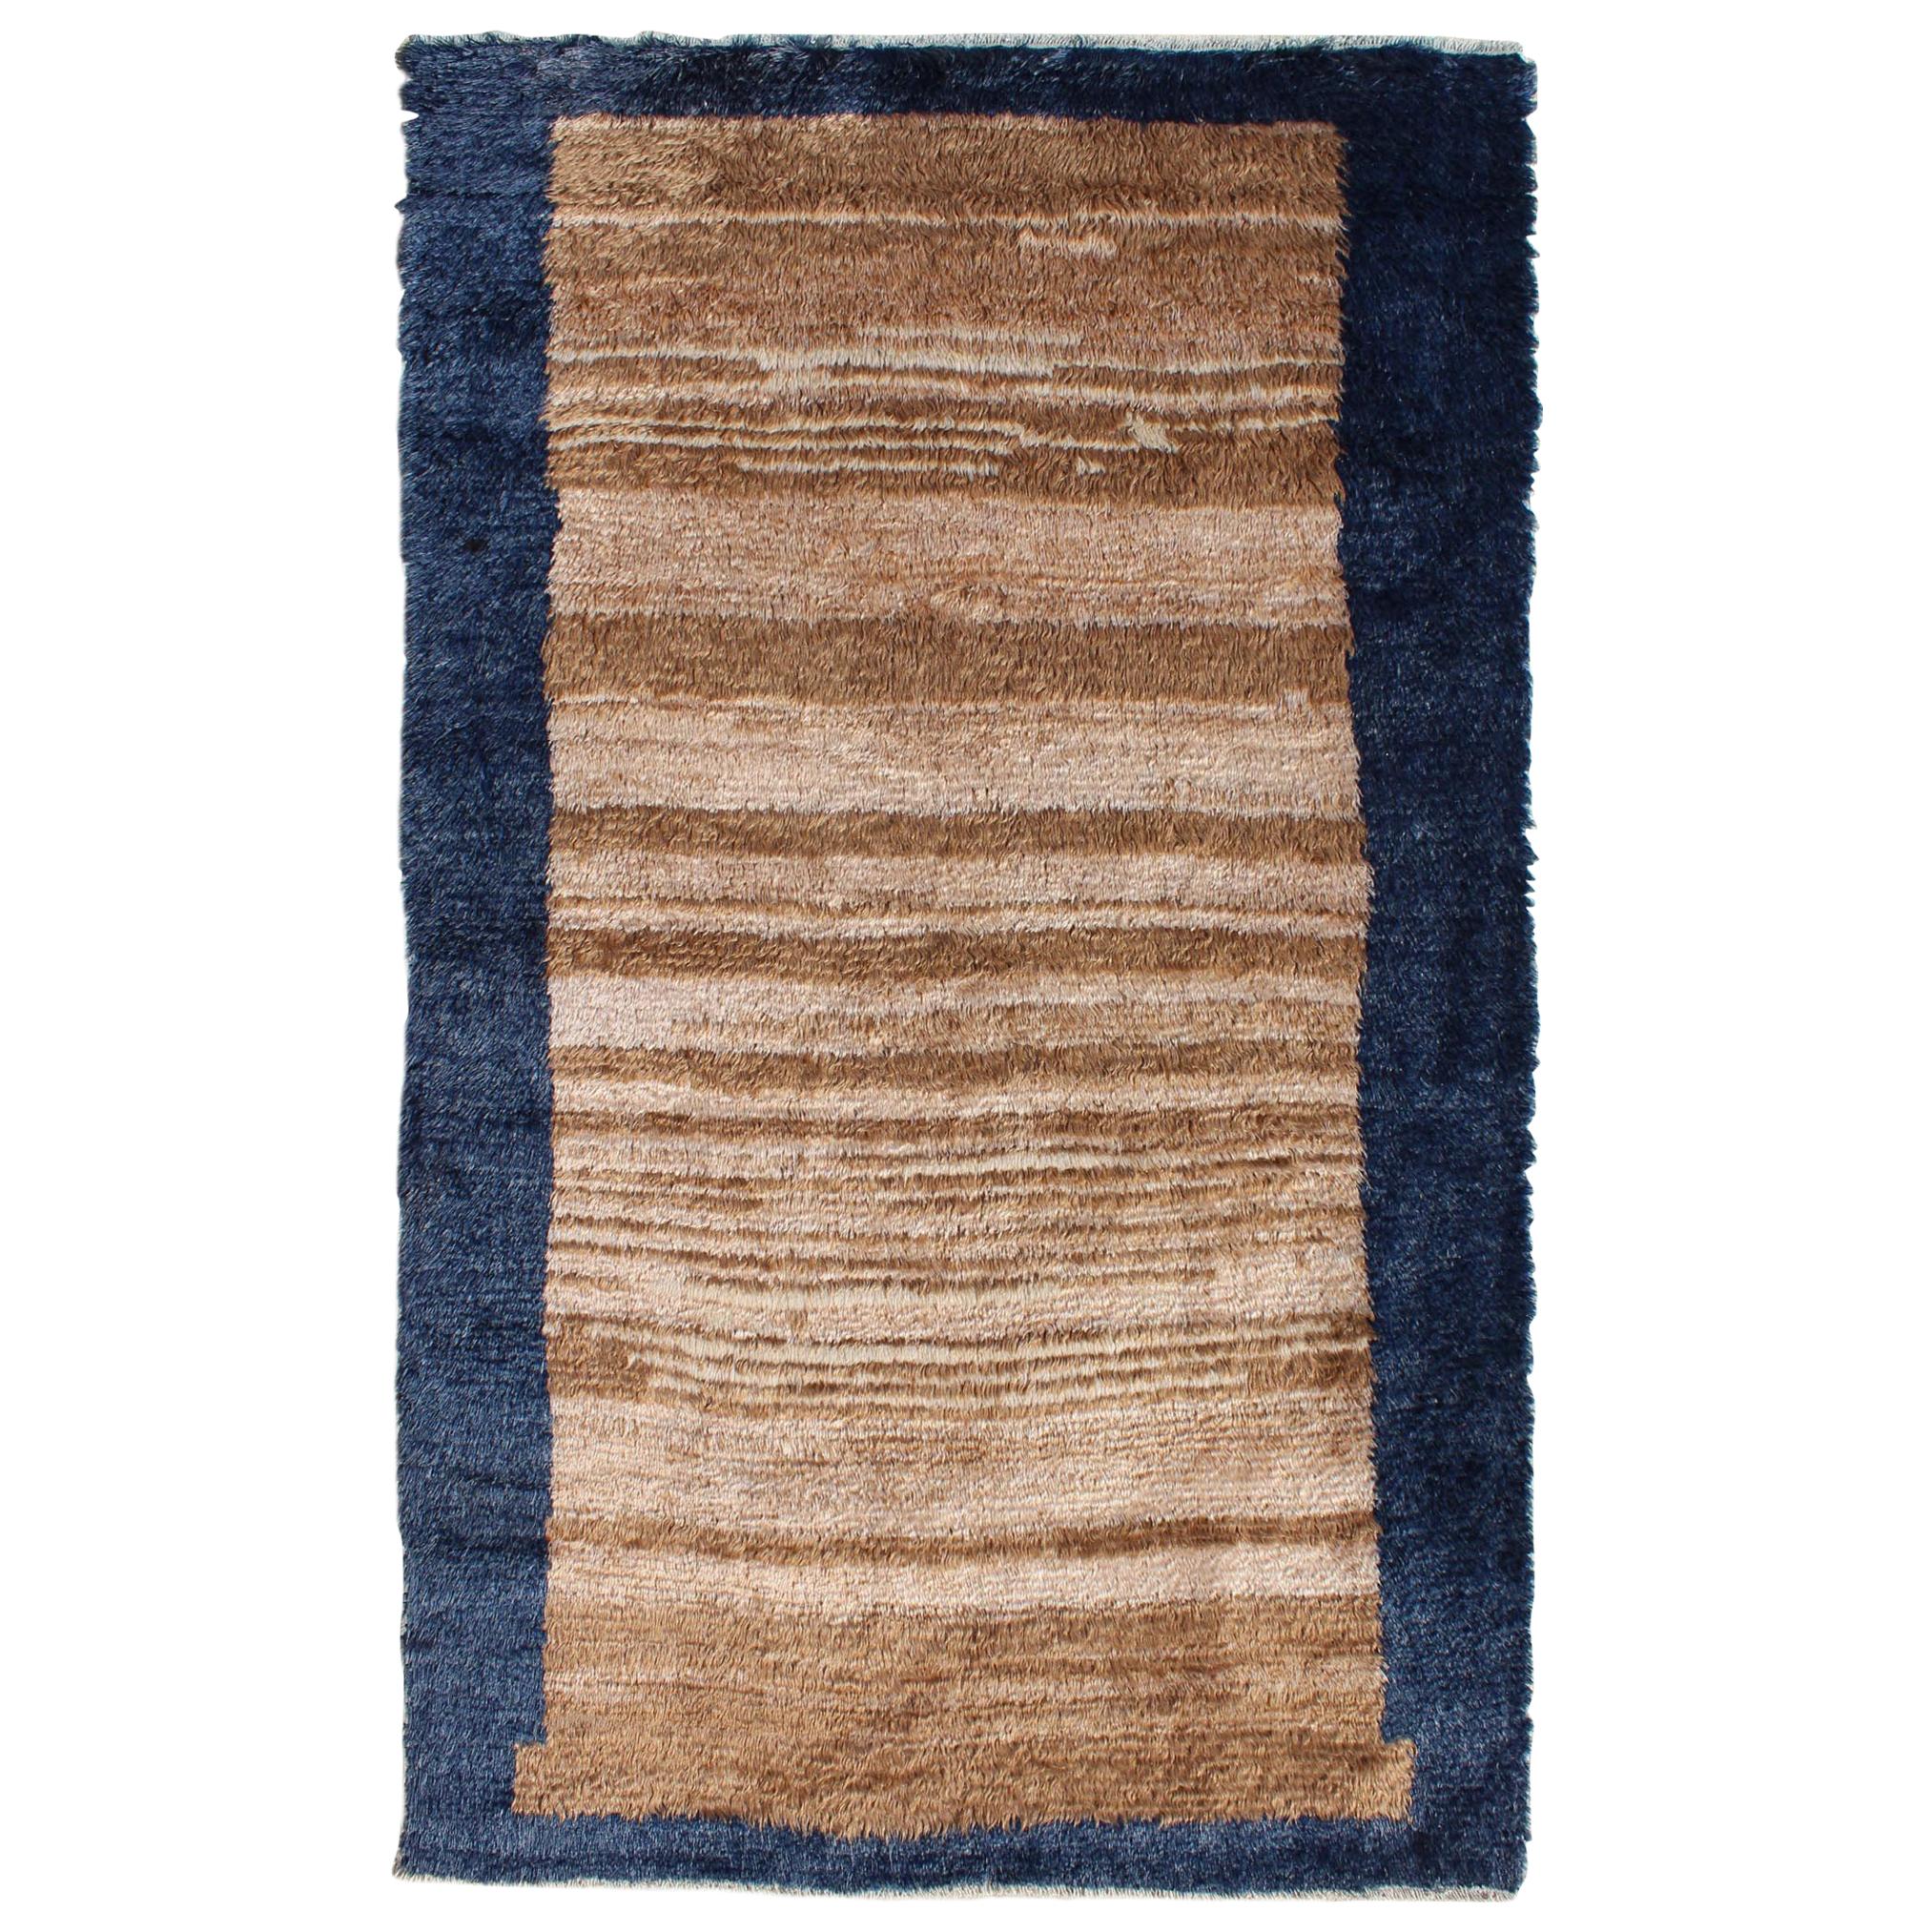 Angora Turkish Tulu Rug with Solid Field in Shades of Brown and Midnight Blue